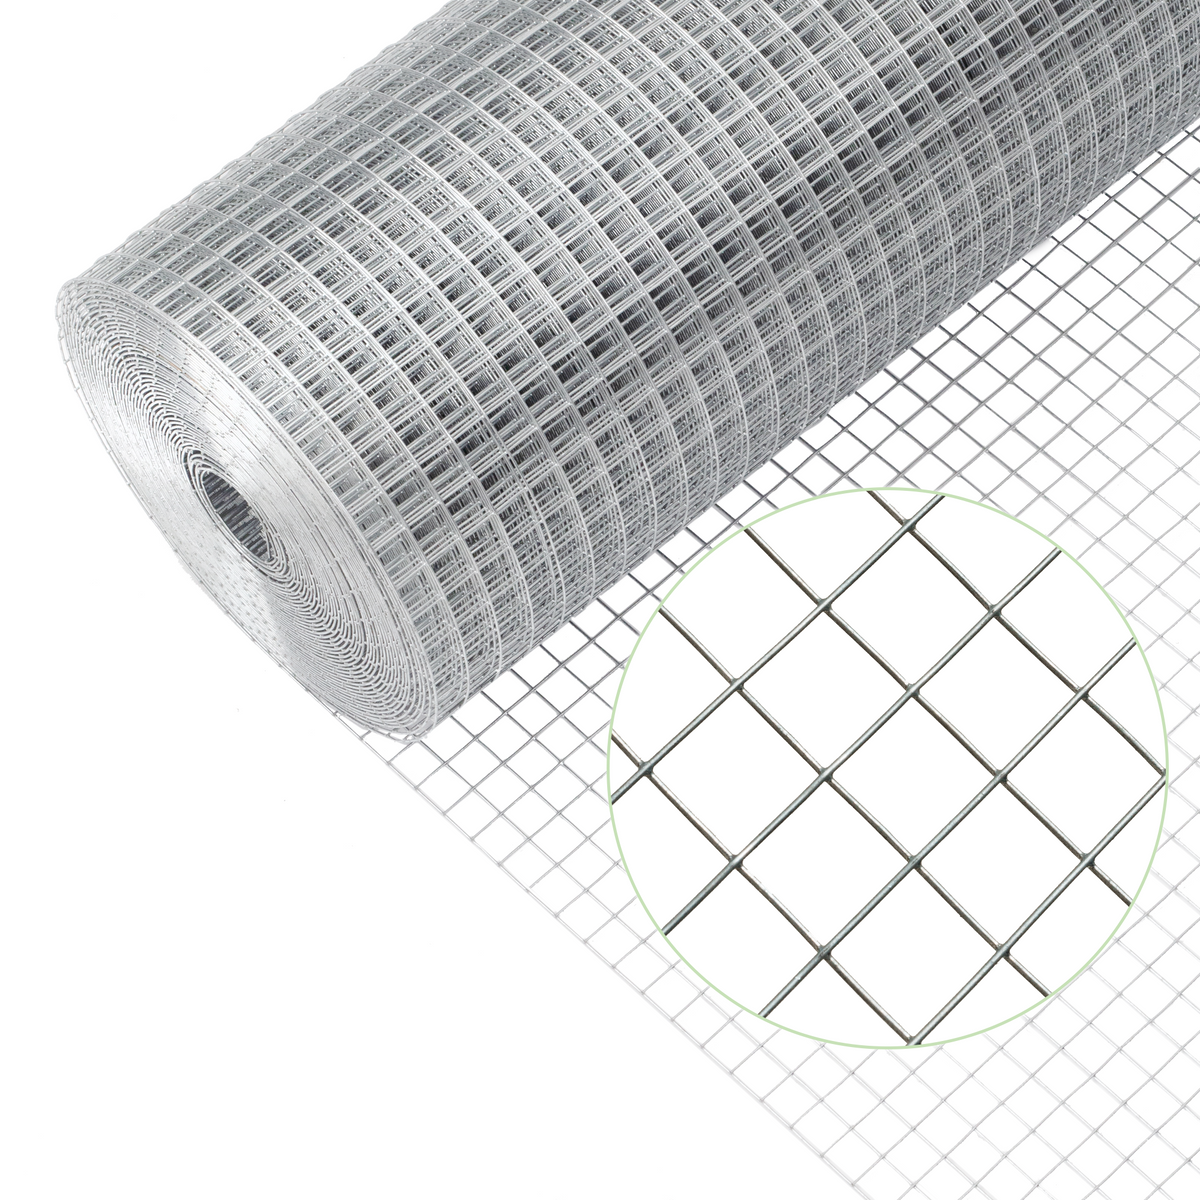 HITTITE Hardware Cloth 1/2 inch 48inx100ft 19 Gauge Square Chicken Wire Galvanizing After Welding Fence Mesh Roll Raised Garden bed Plant Supports Poultry Netting Cage Snake Fence